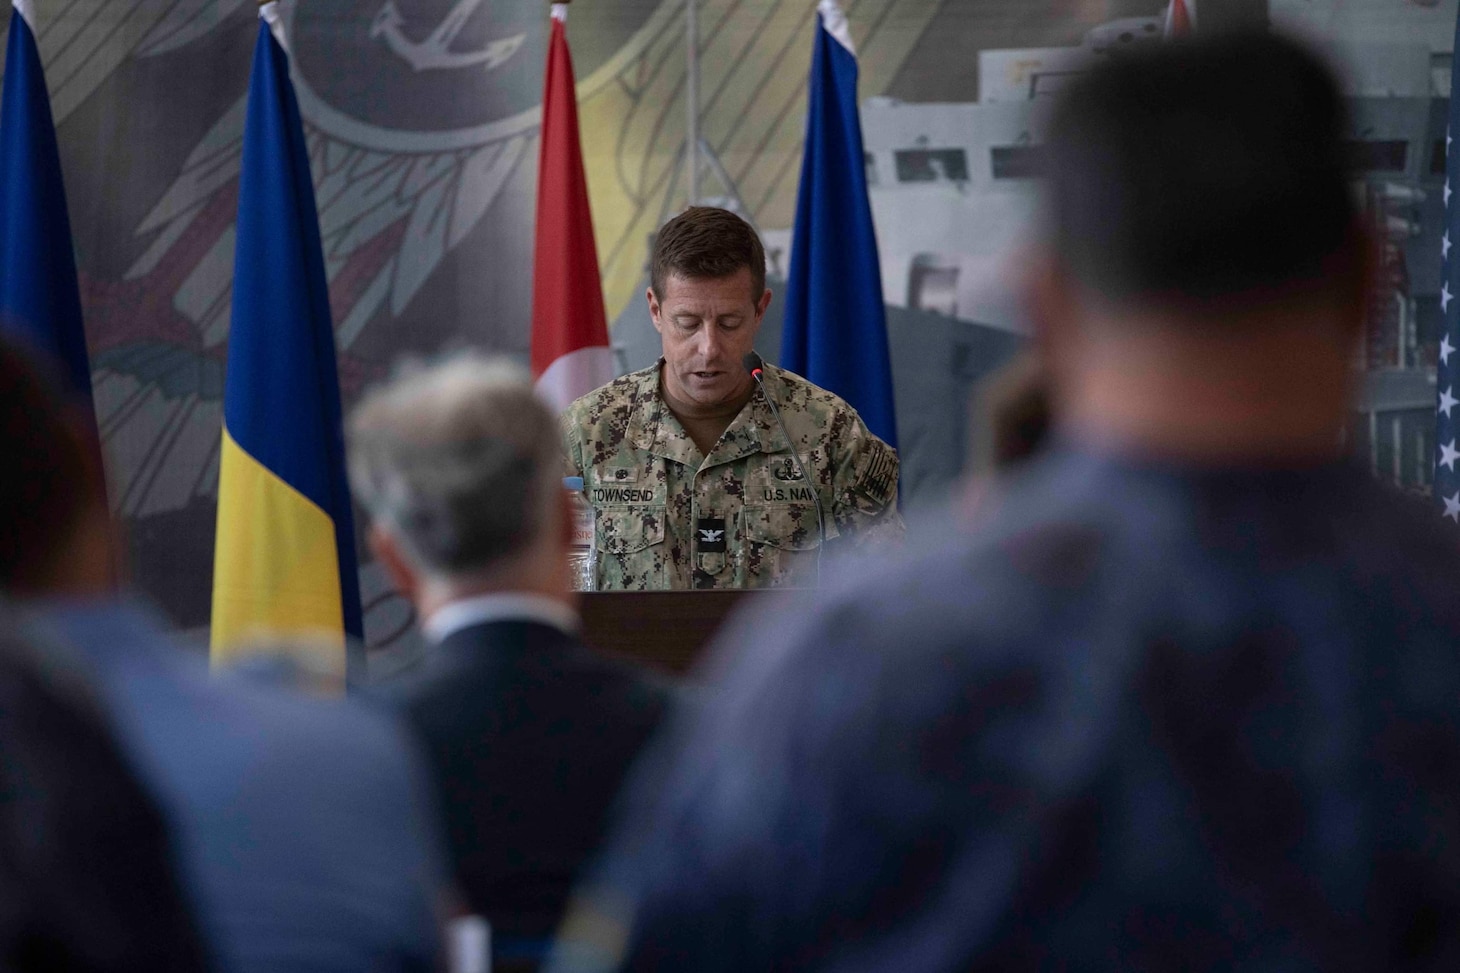 Sea Breeze 2023-3 is scheduled to run from Sept. 11-15, 2023, in Constanta, Romania. This is a land and sea-based exercise with multinational Allies and Partners, aimed to enhance the capabilities of Black Sea and Partnership for Peace maritime security forces while progressively training and preparing the Ukraine Maritime Command staff.